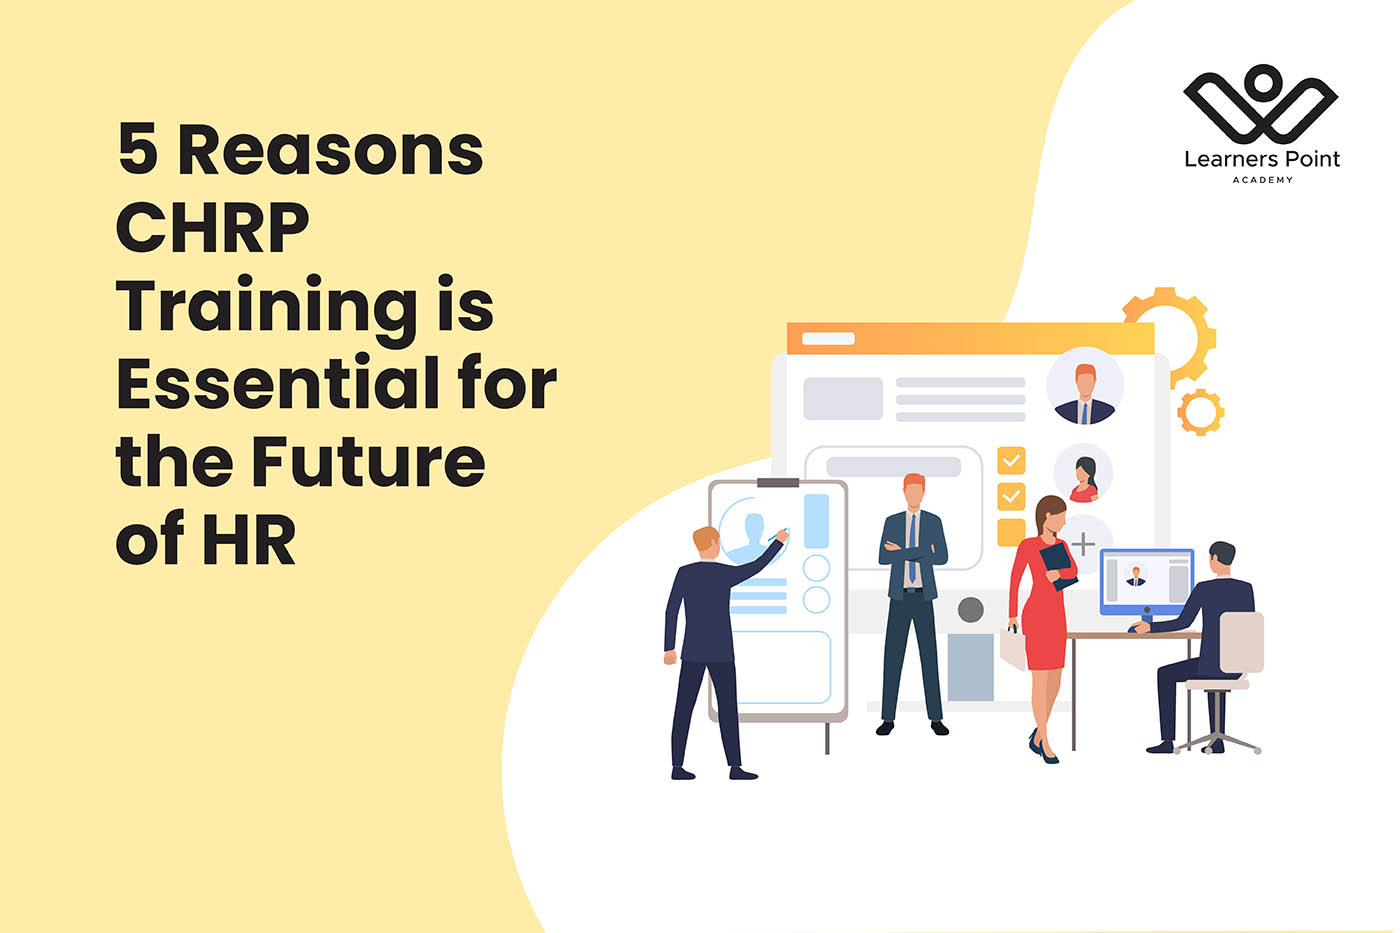 5 Reasons CHRP Training is Essential for the Future of HR